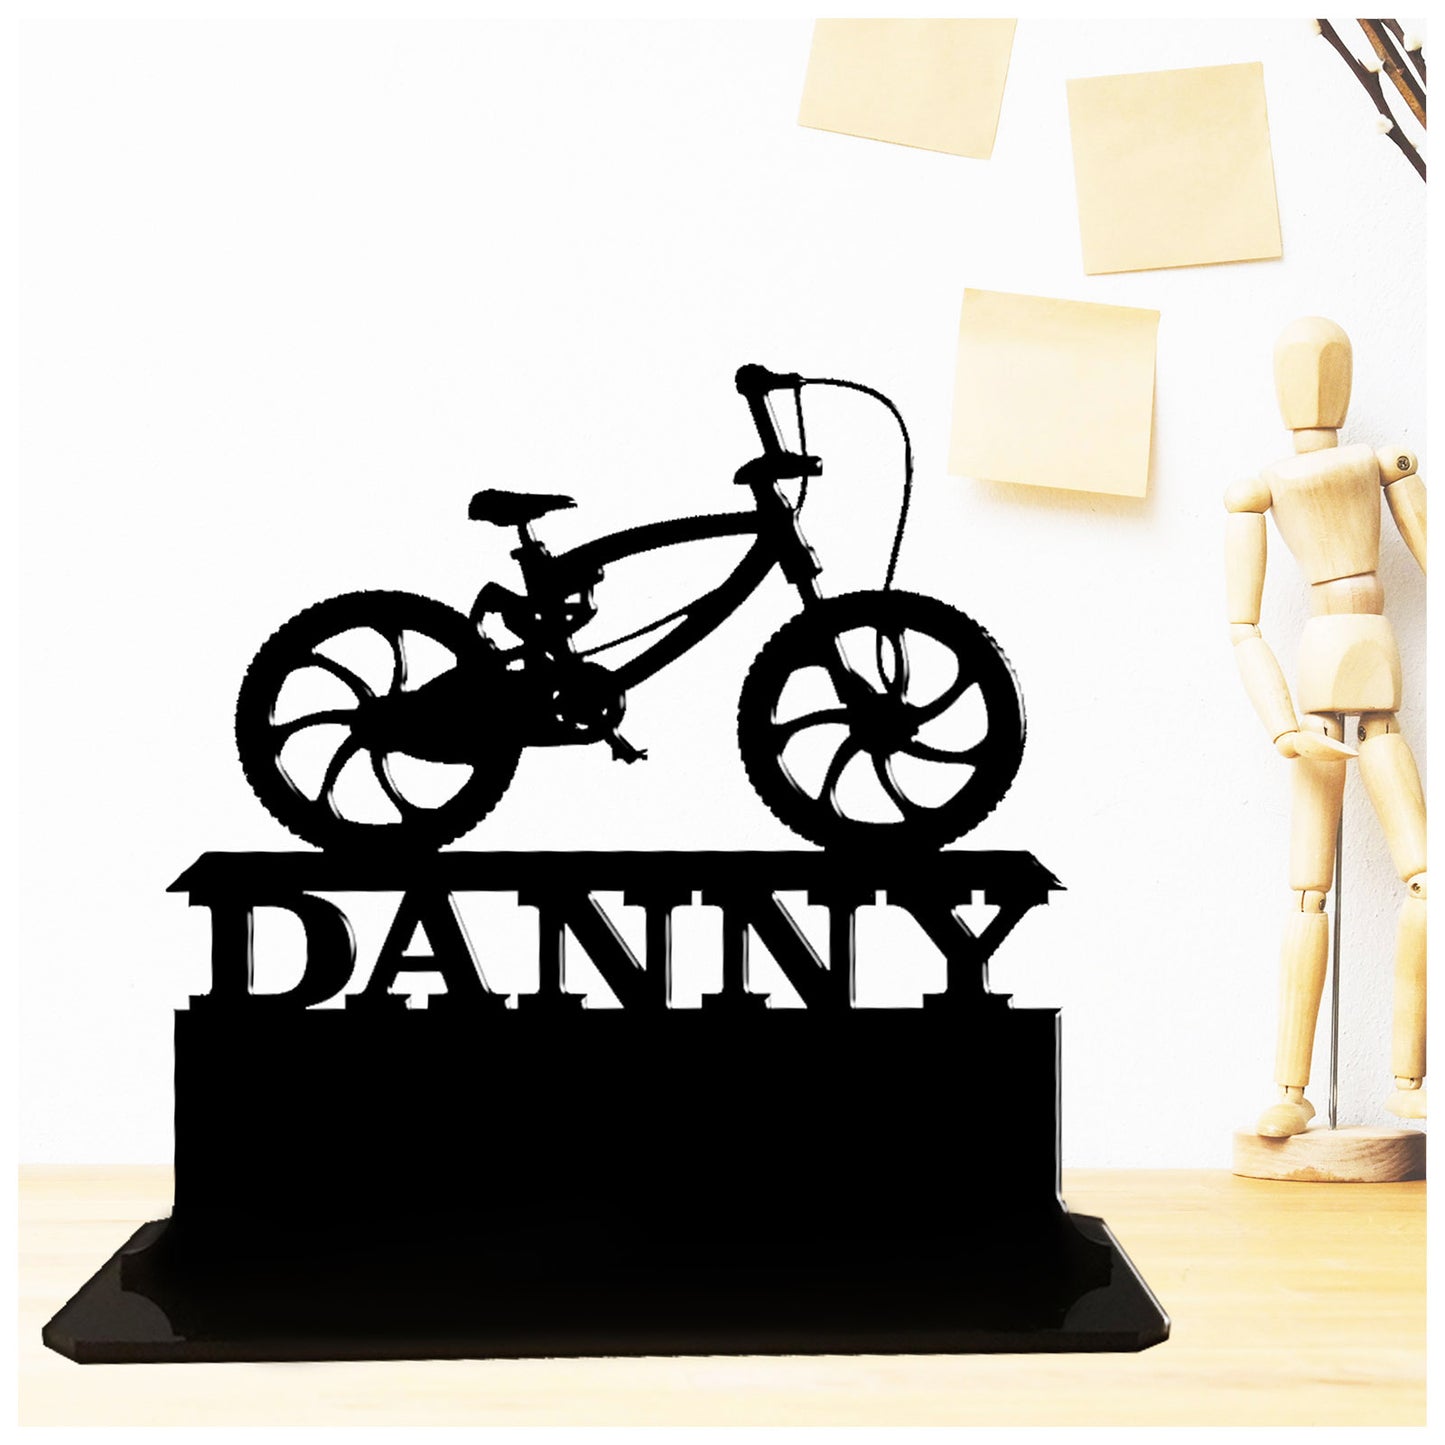 Personalised acrylic gift for bmx riders. This standalone present is a keepsake ornamental plaque.